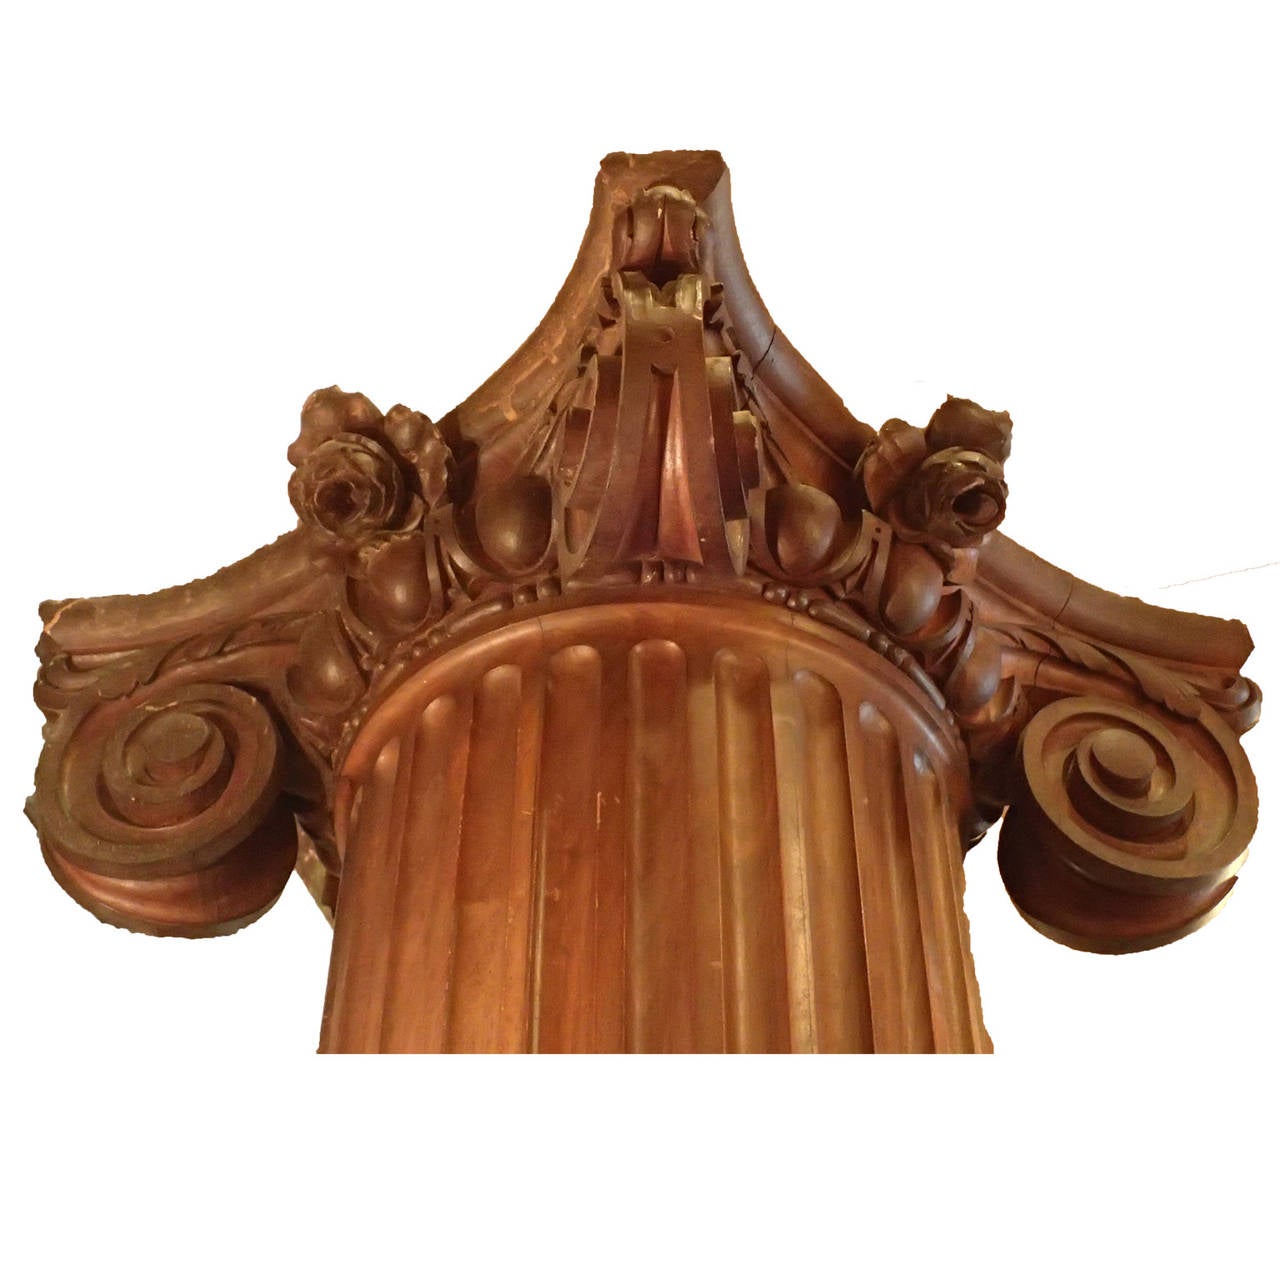 Wonderful antique, English fluted walnut carved column adorned with a capital with beautiful volutes and an egg and dart design topped with a flower. 
Walnut Corinthian column possesses natural flair and festive character that has set it apart